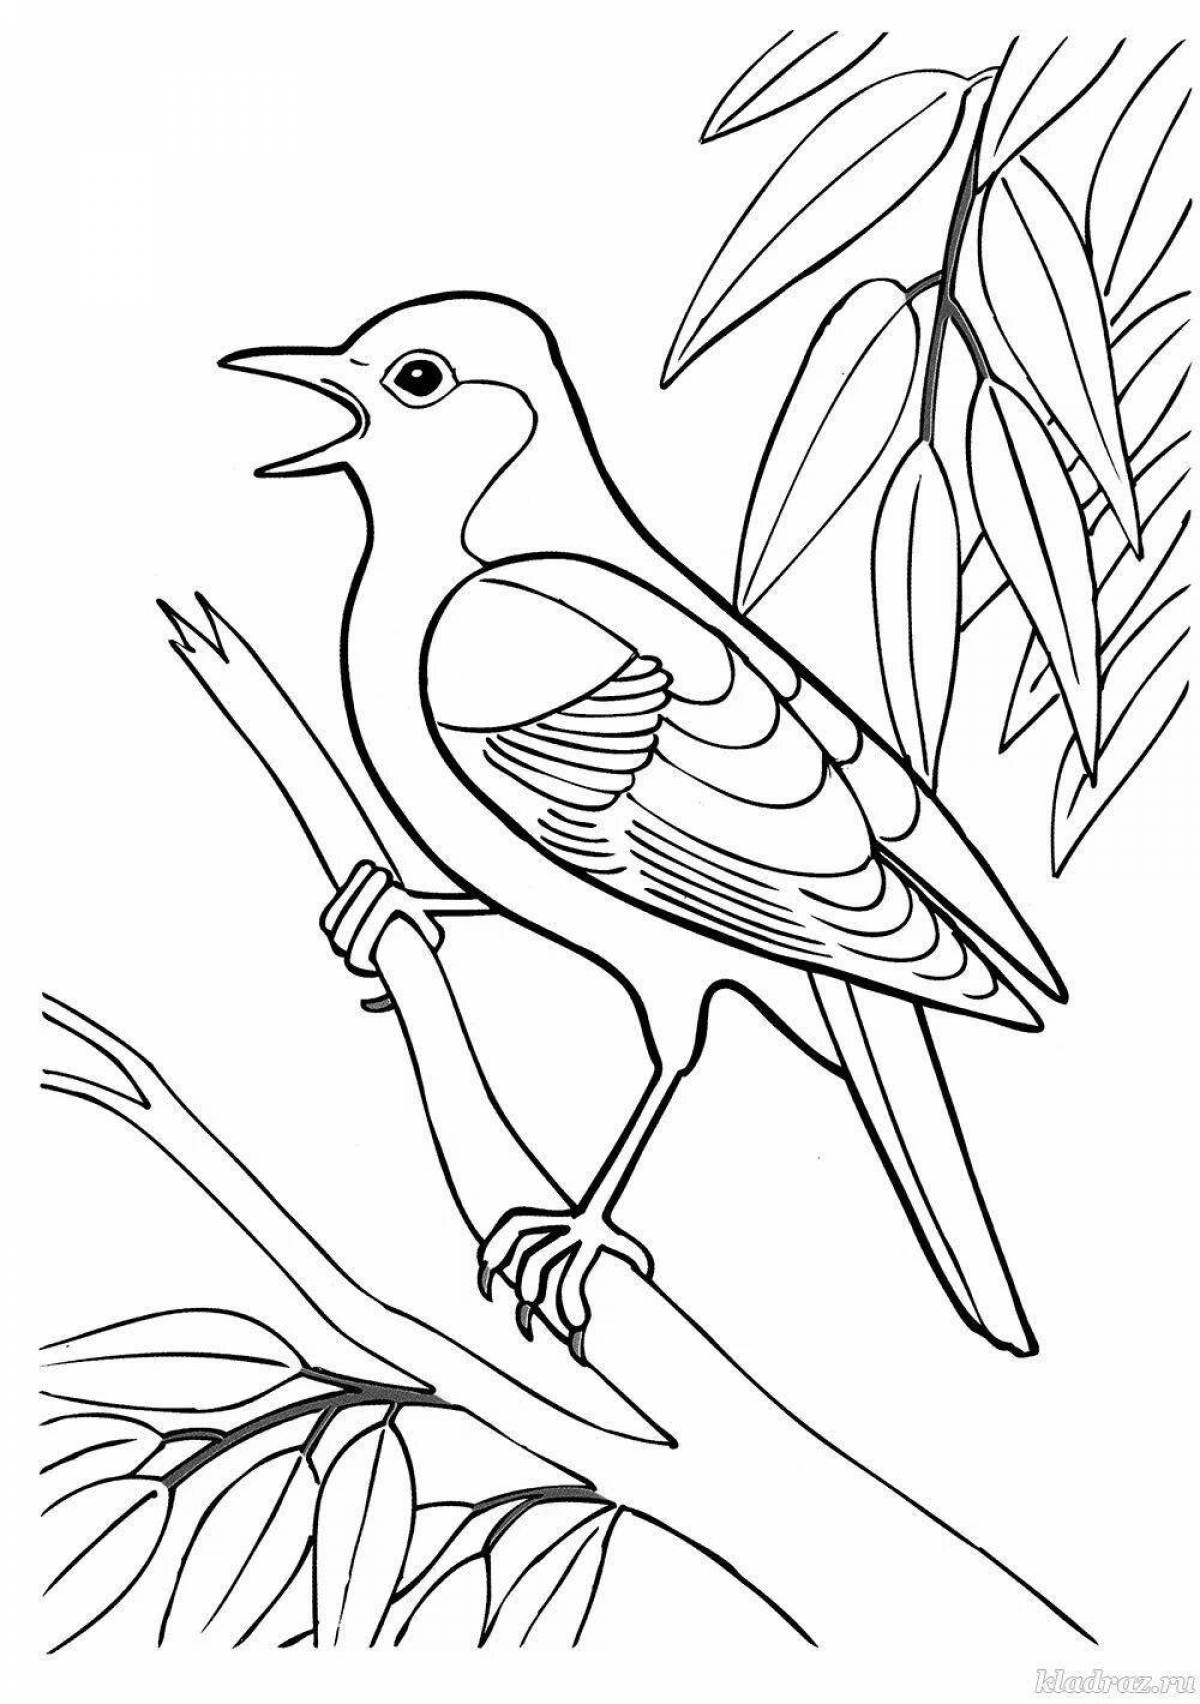 Amazing bird coloring page